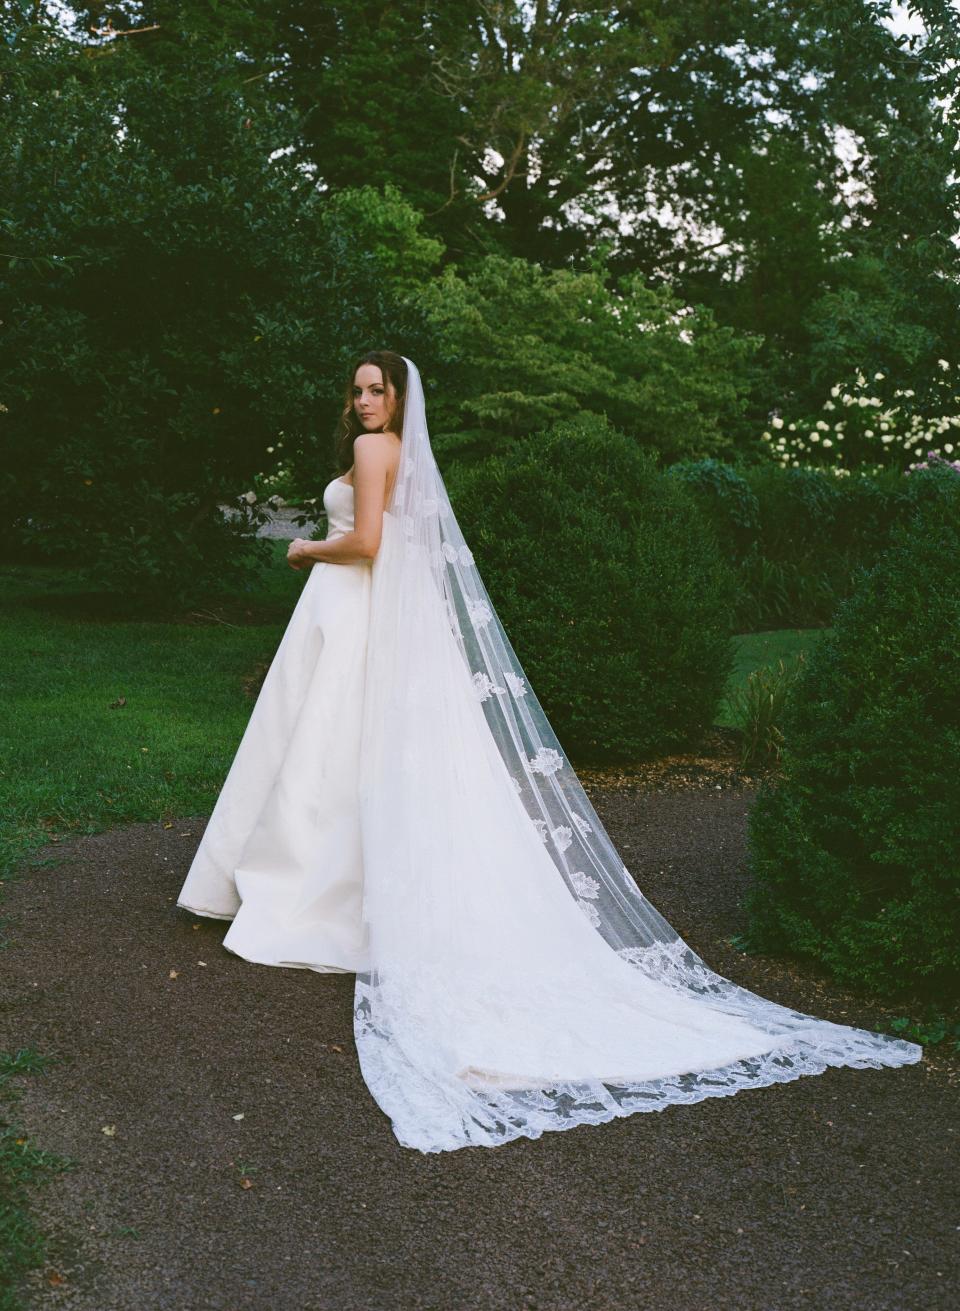 Actress Elizabeth Gillies Drove an RV to Her Wedding at a Charming Farm in New Jersey